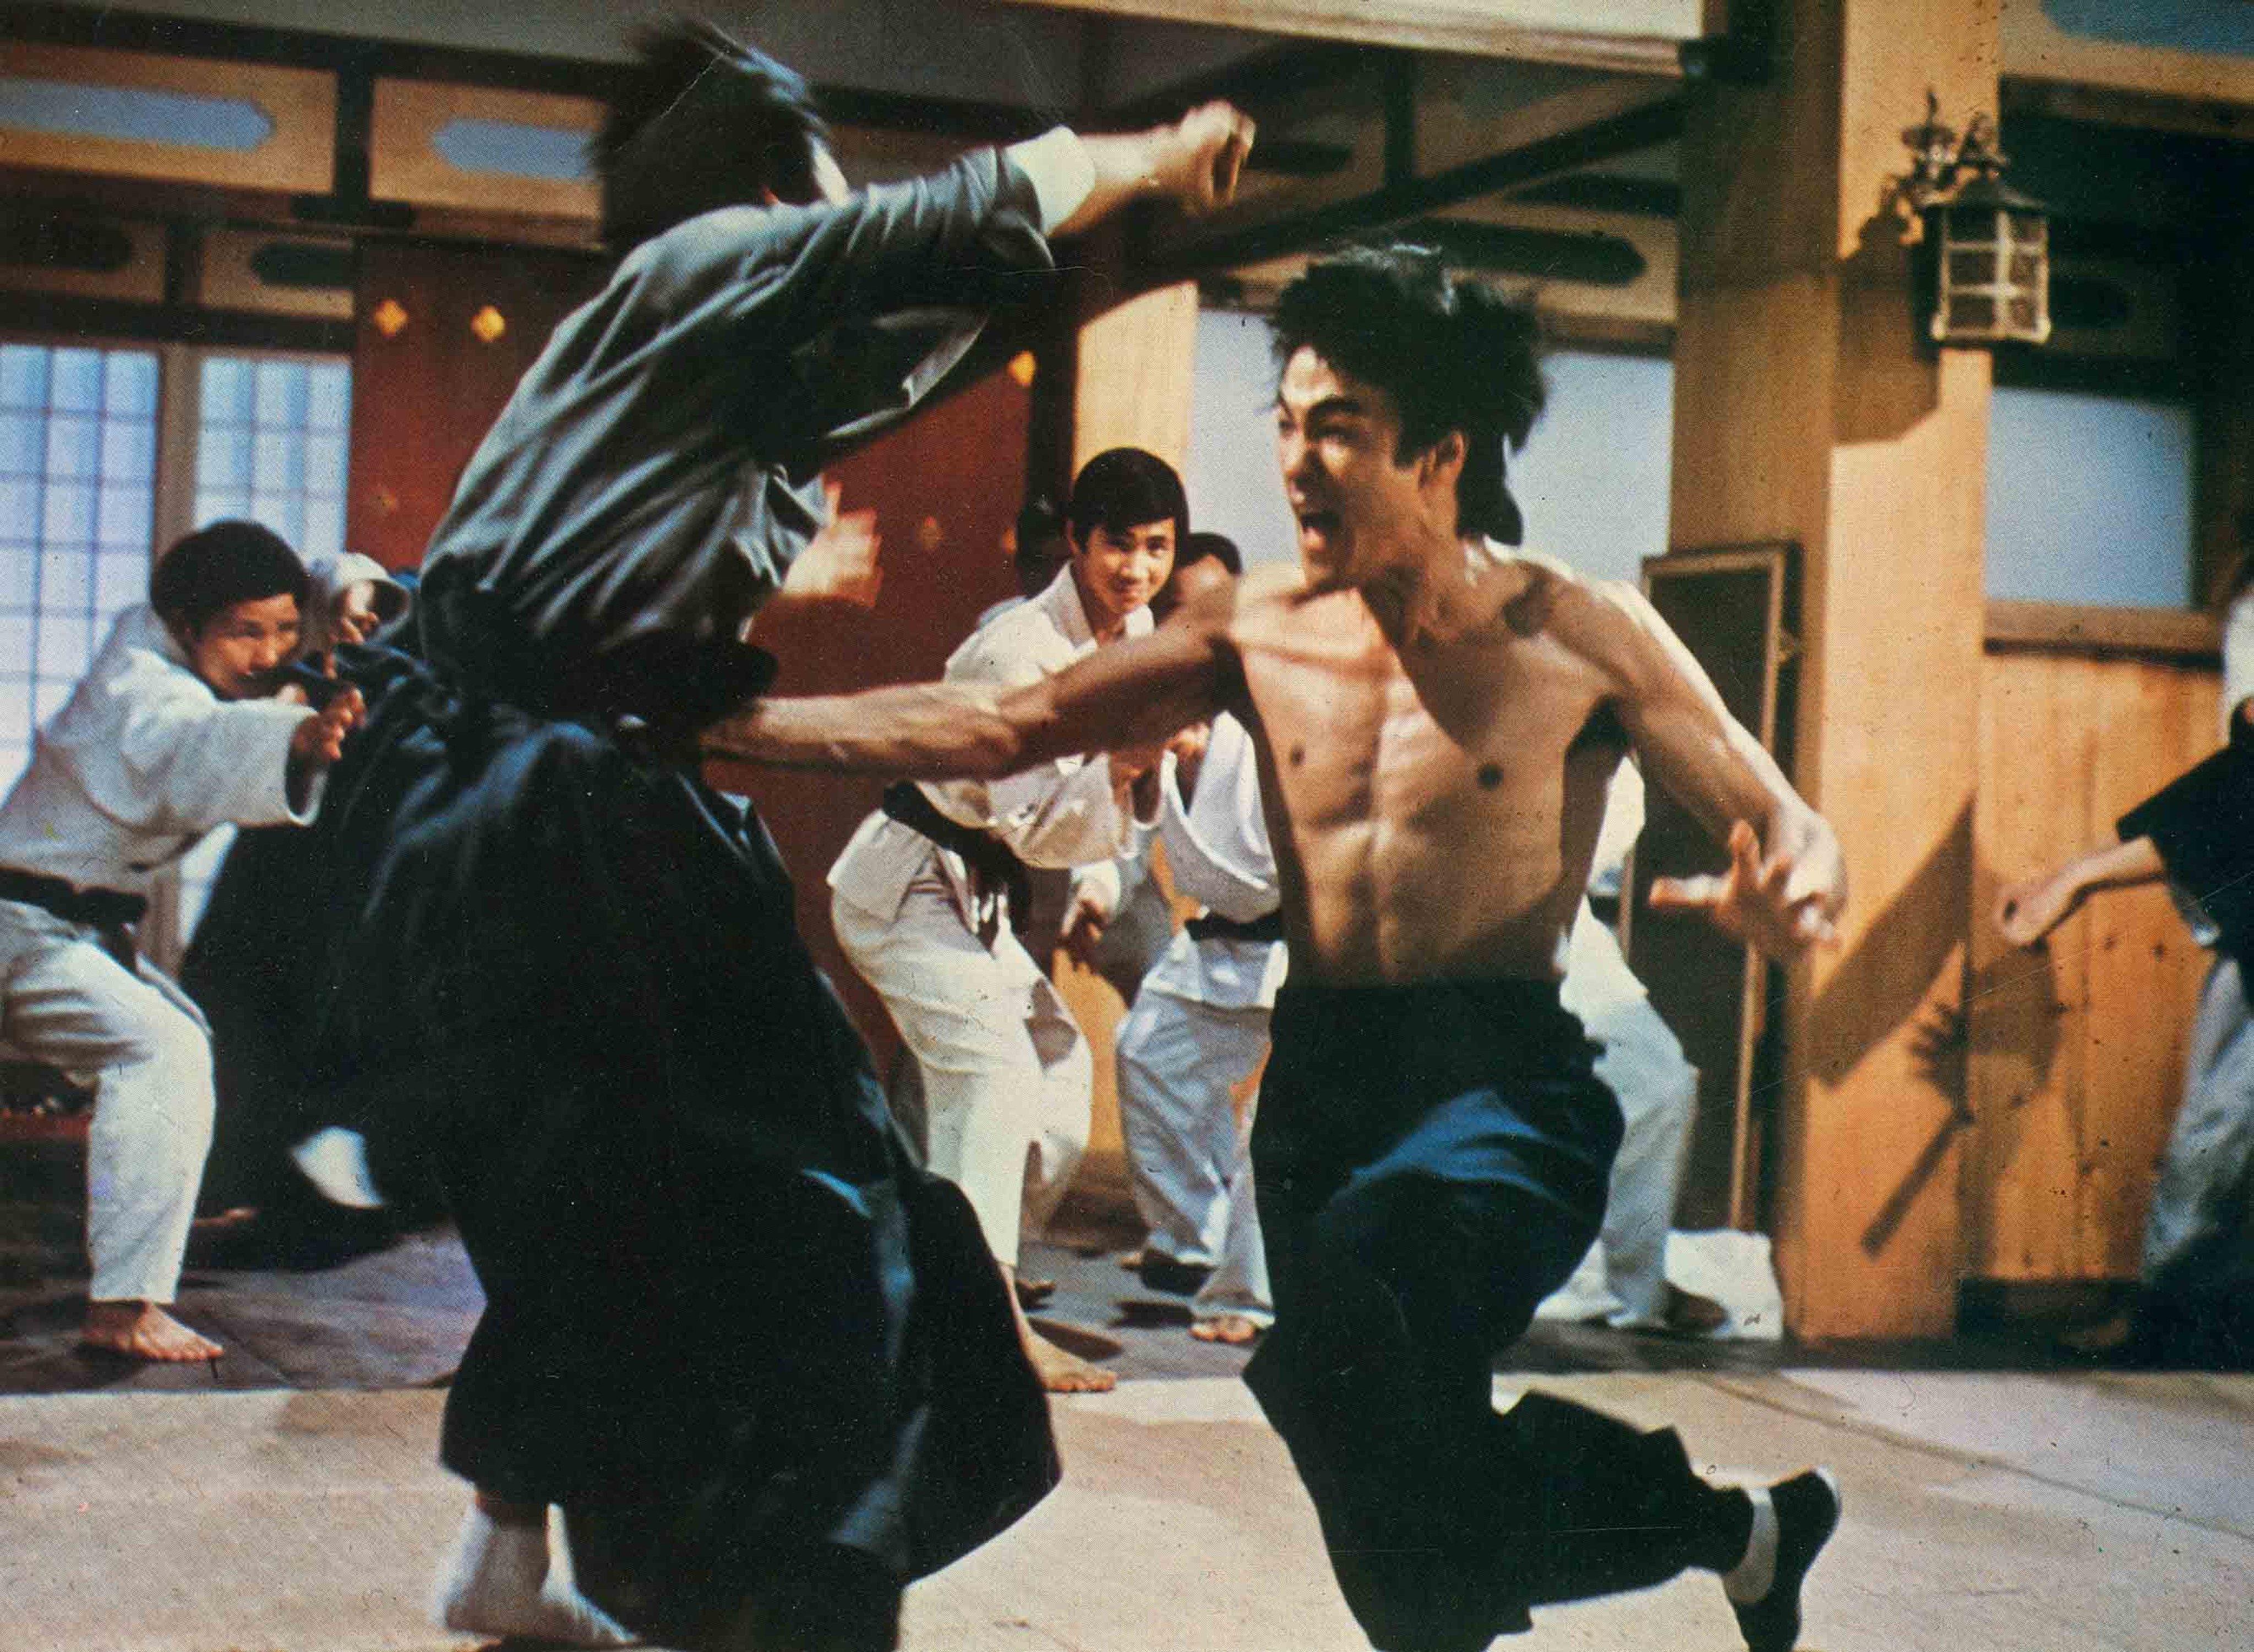 Bruce Lee in Fist of Fury (1972). Photo: Golden Harvest